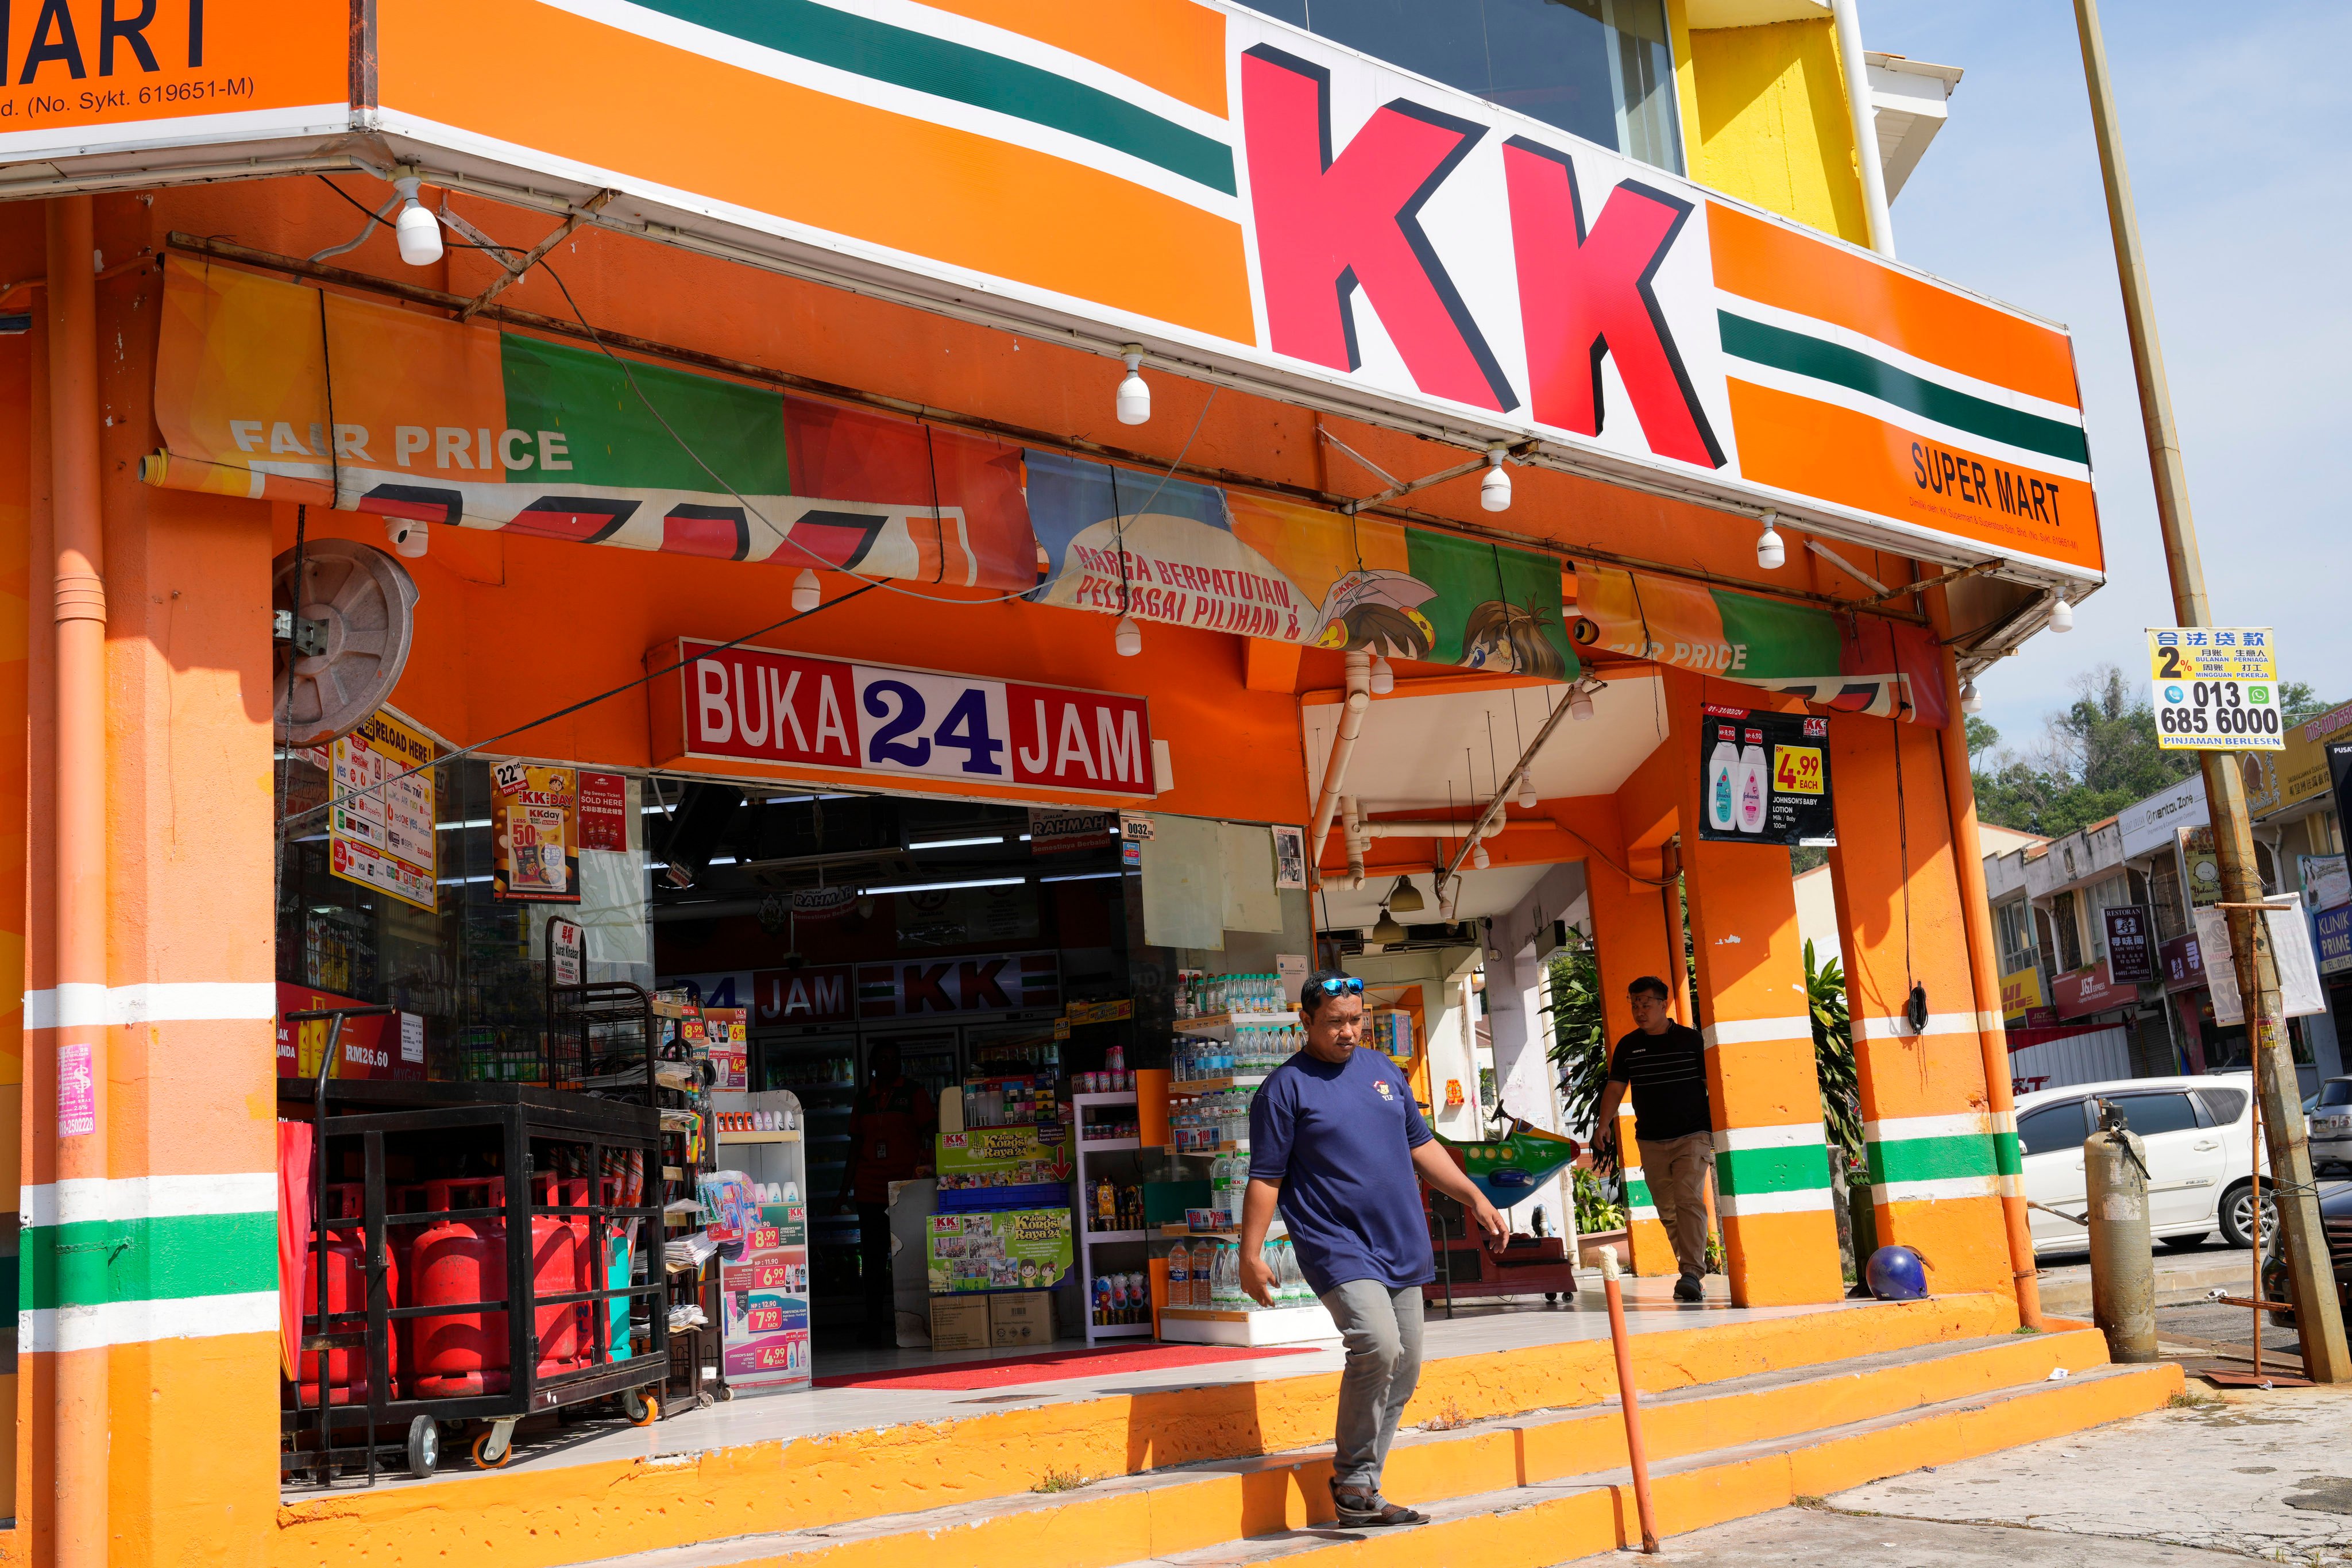 A KK Mart convenience store in Puchong area on the outskirts of of Kuala Lumpur, Malaysia. Photo: AP